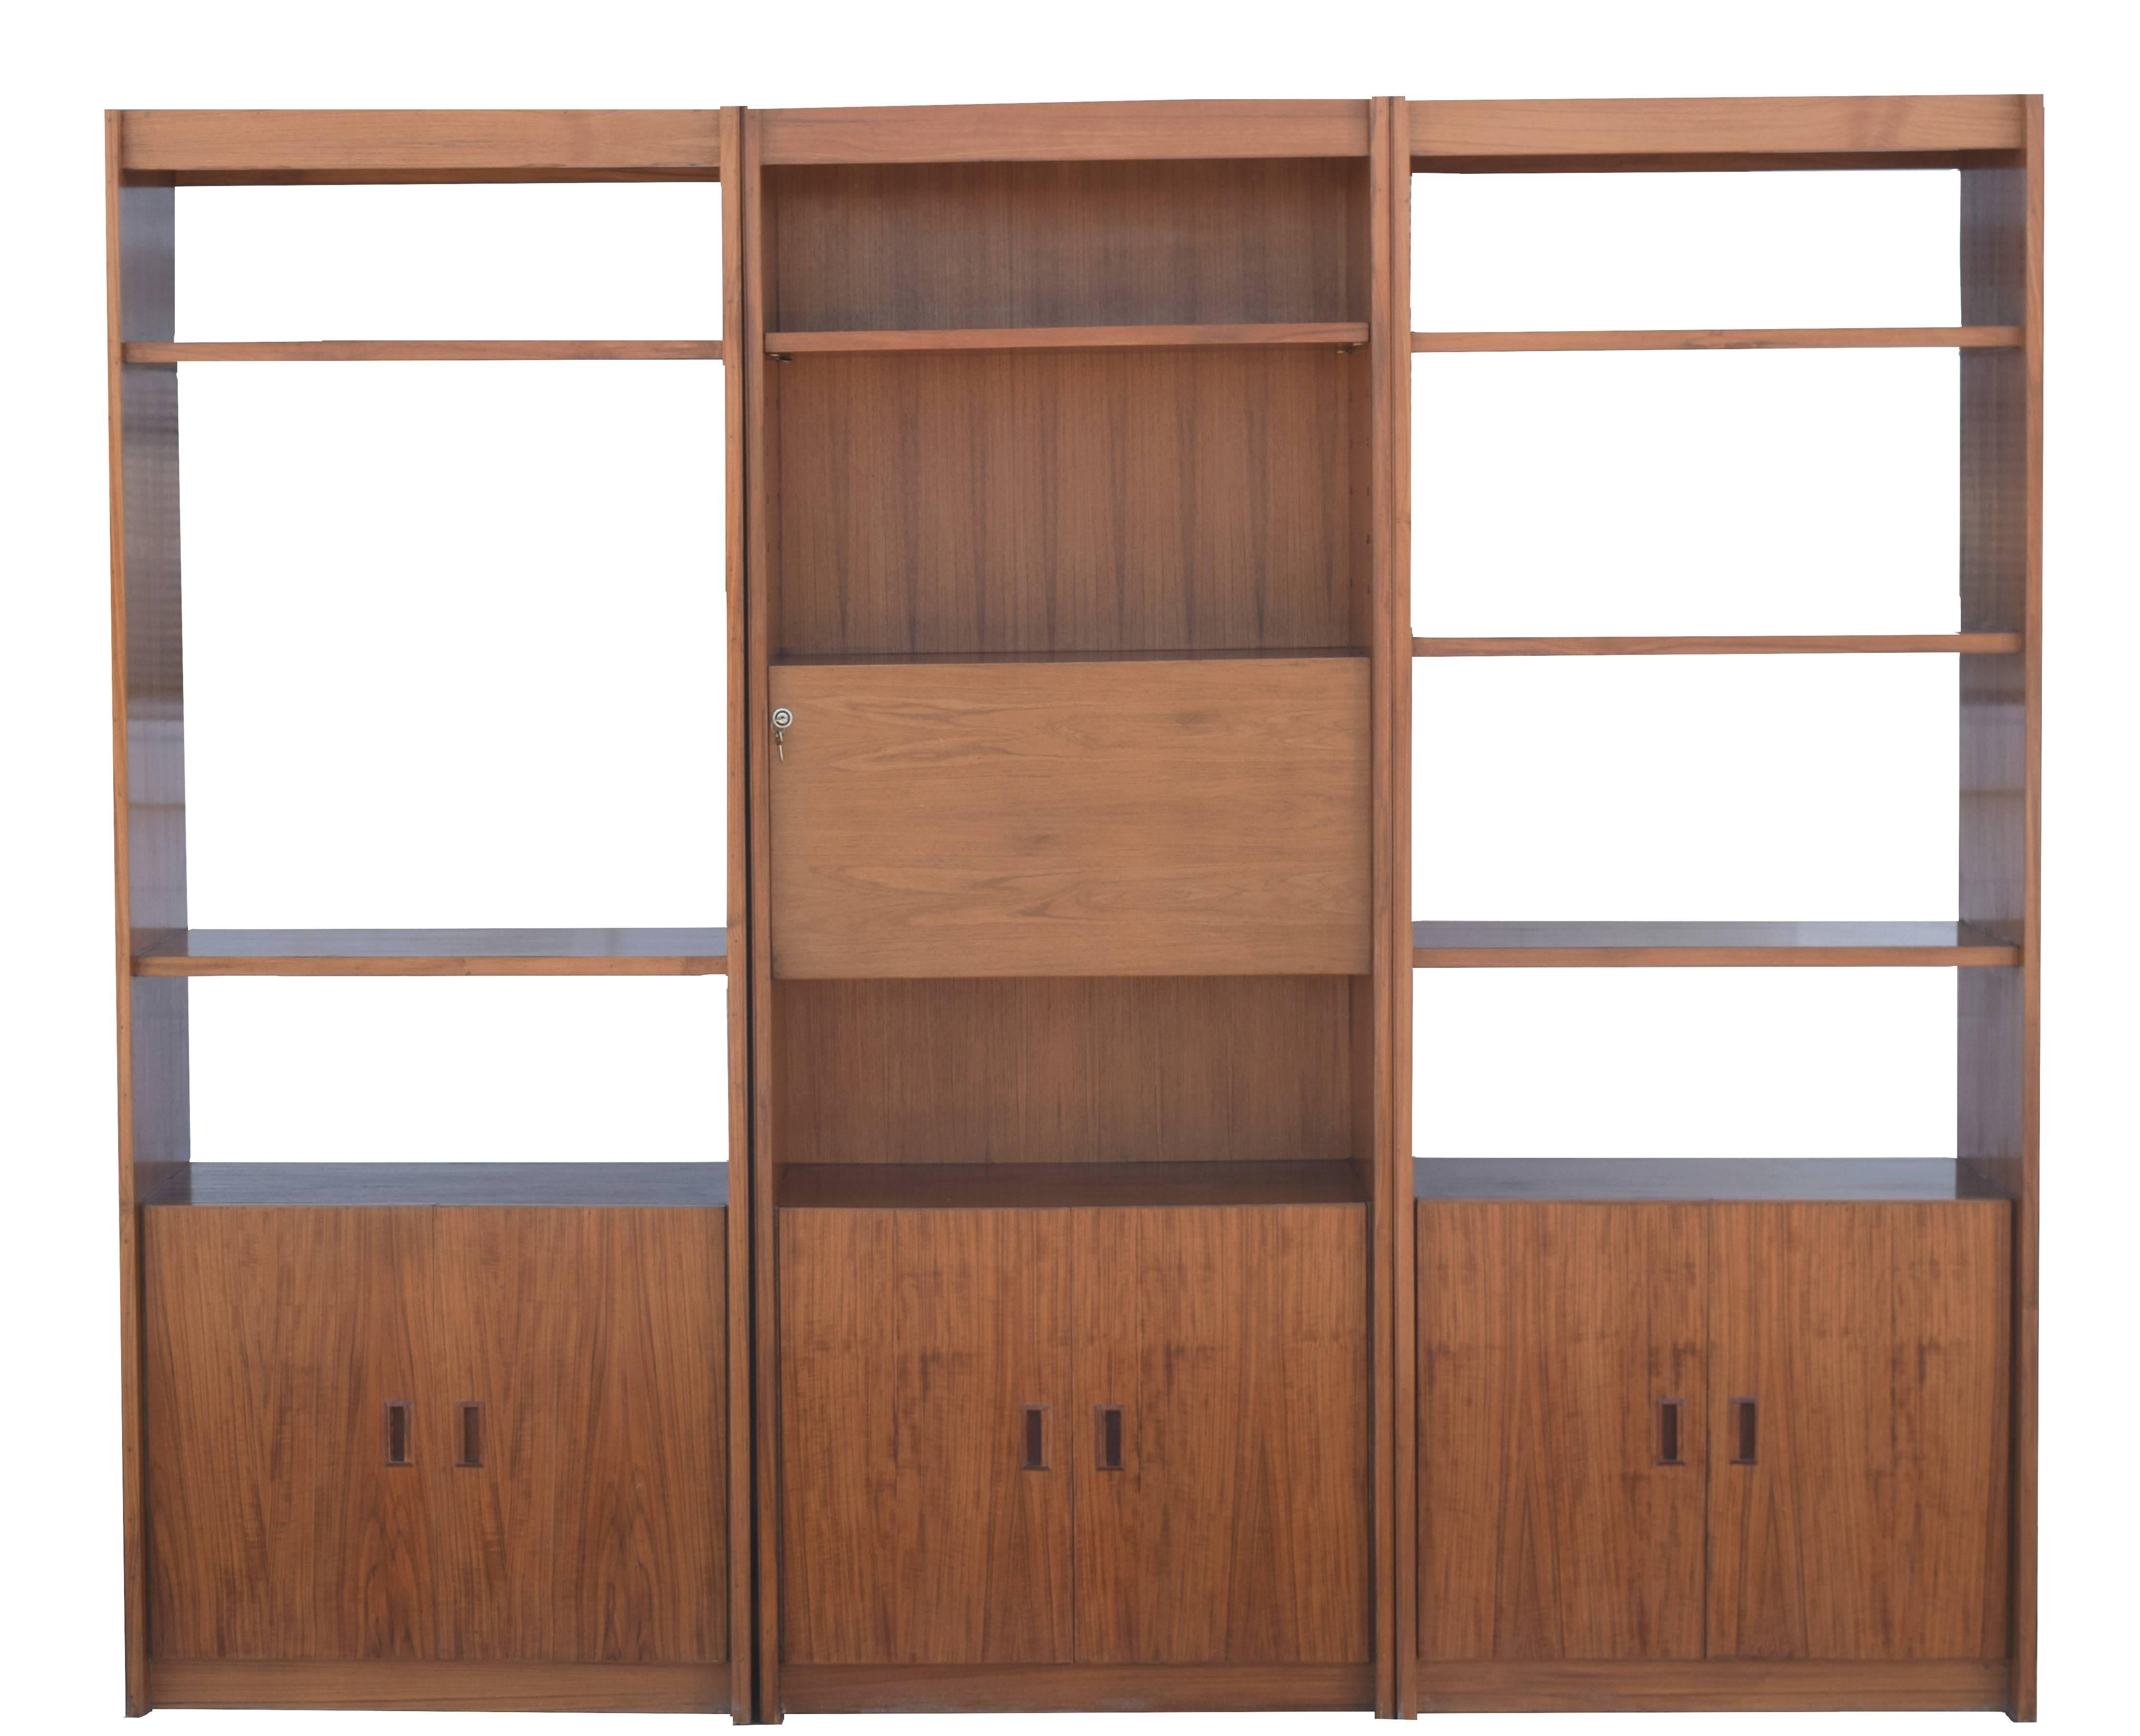 Denmark, circa 1970
Teak, locks, mirrored interior
Each 33 wide x 83.5 tall and 16.5 inches deep
Overall 99 wide, 83.5 tall and 16.5 inches deep

One of a kind vintage custom made bookcase and cabinets with the designer and maker unknown, produced